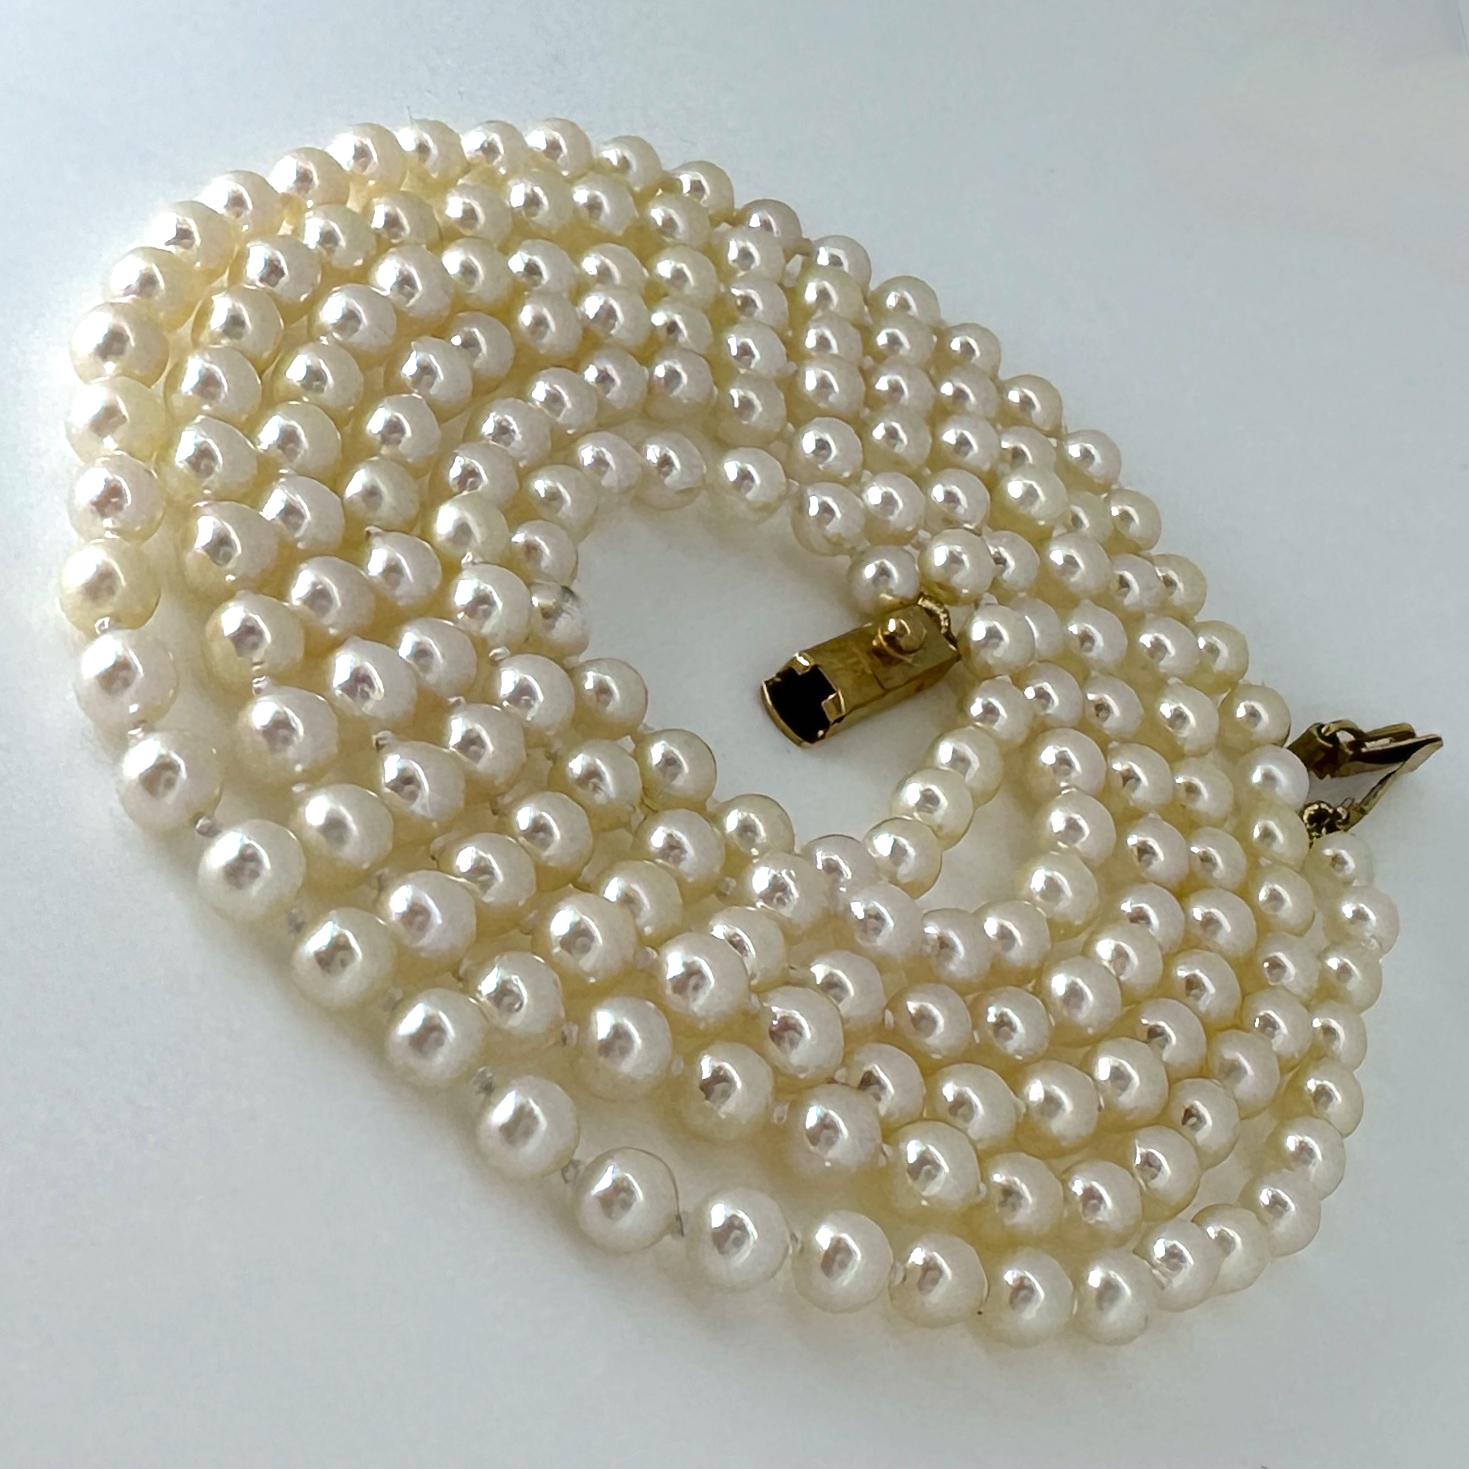 Opera Length Strand of Japanese Akoya Cultured Pearls with 14k Gold Clasp 3